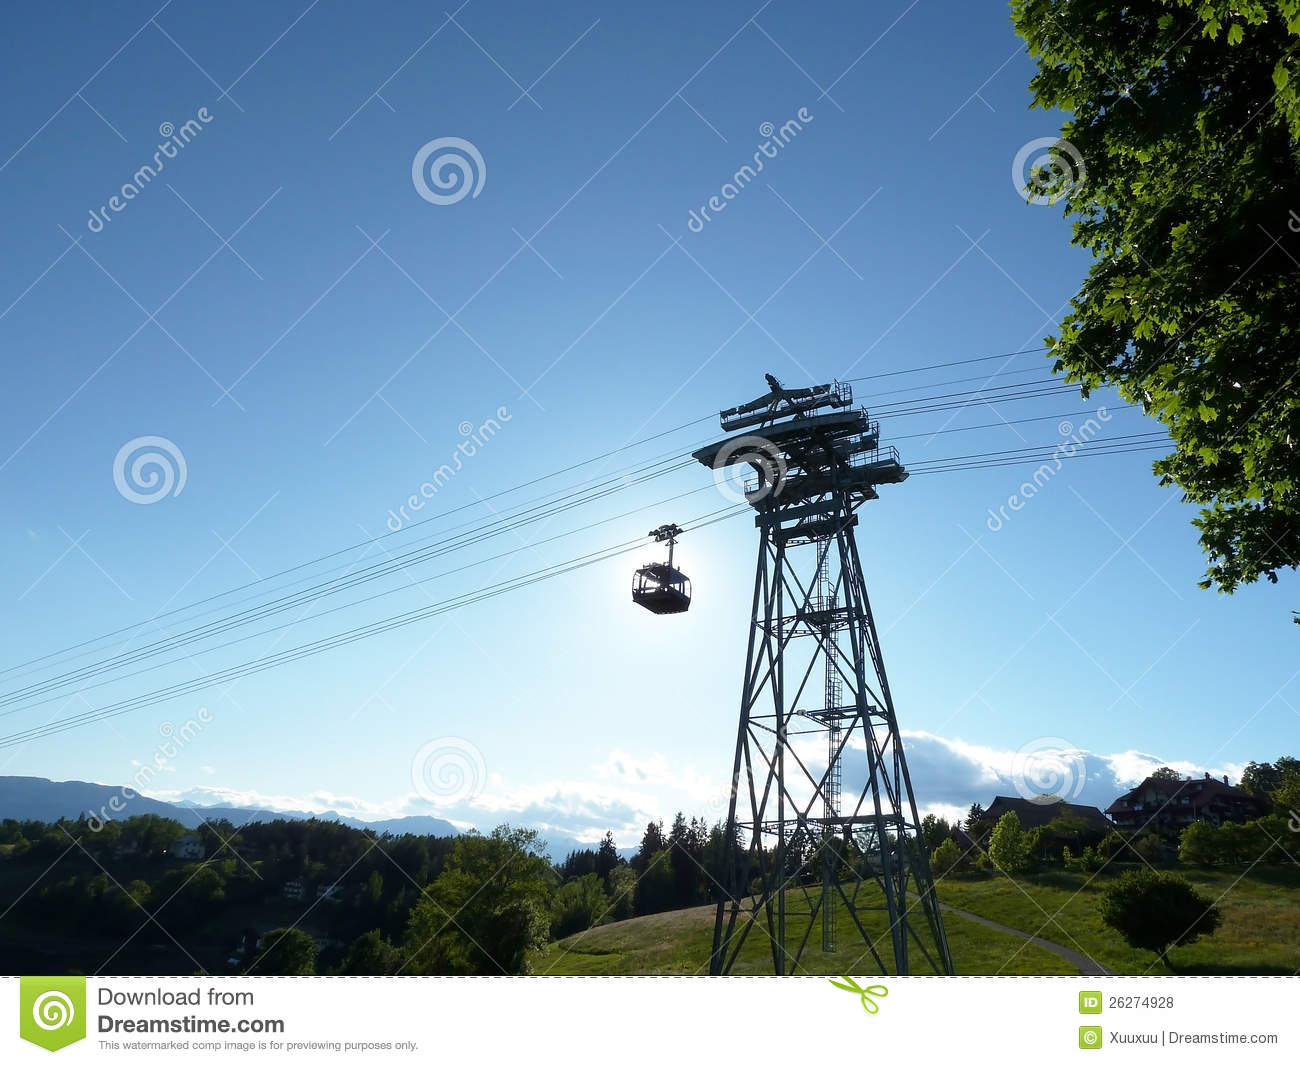 Ski Lift In Summer And Mountain Landscape Royalty Free Stock Photos    